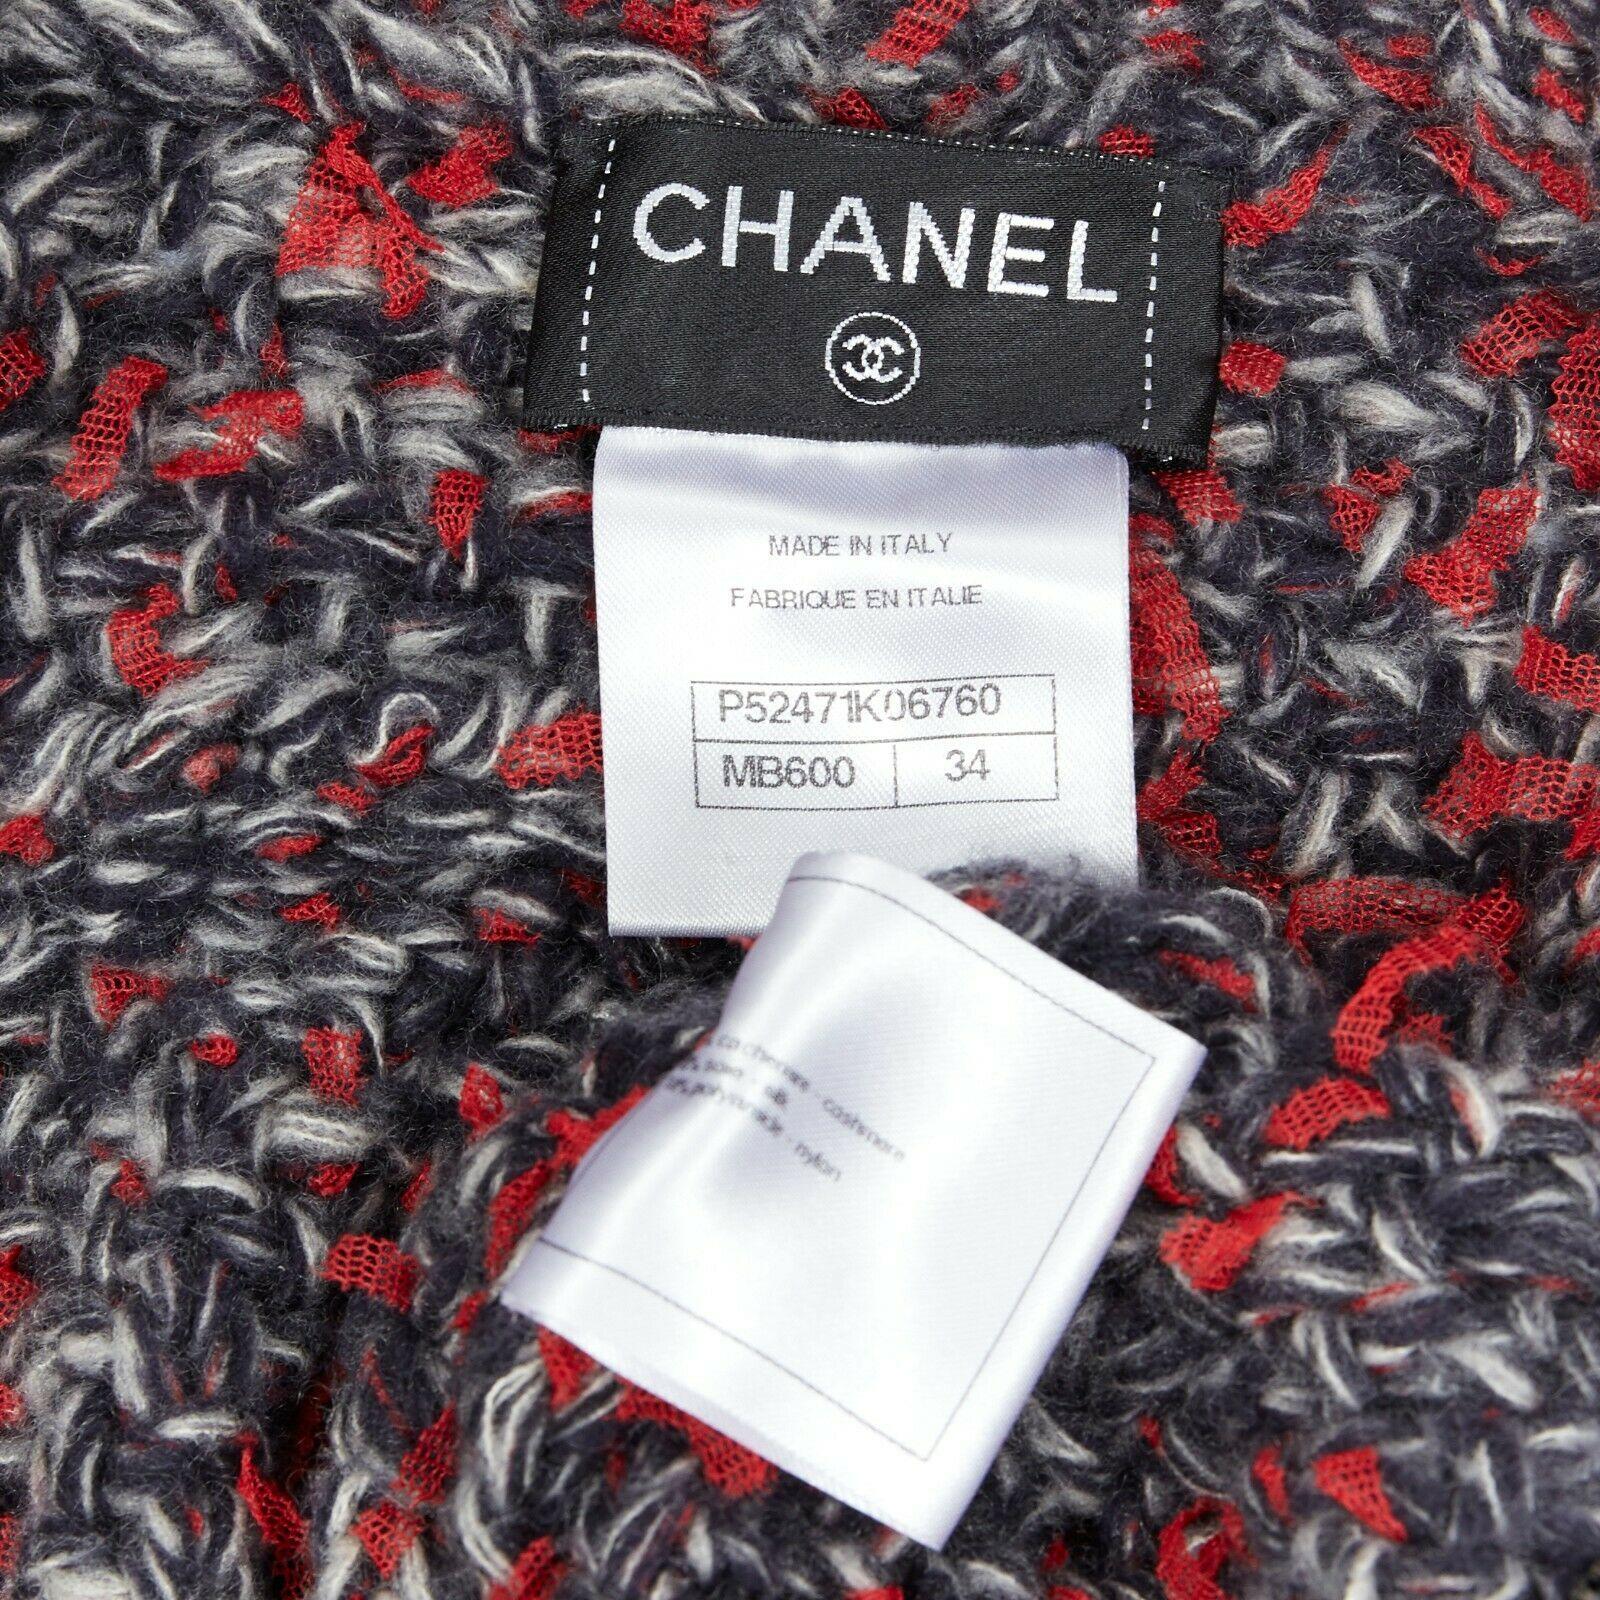 CHANEL cashmere knitted blend black red grey aline zip pullover sweater FR34 XS 5